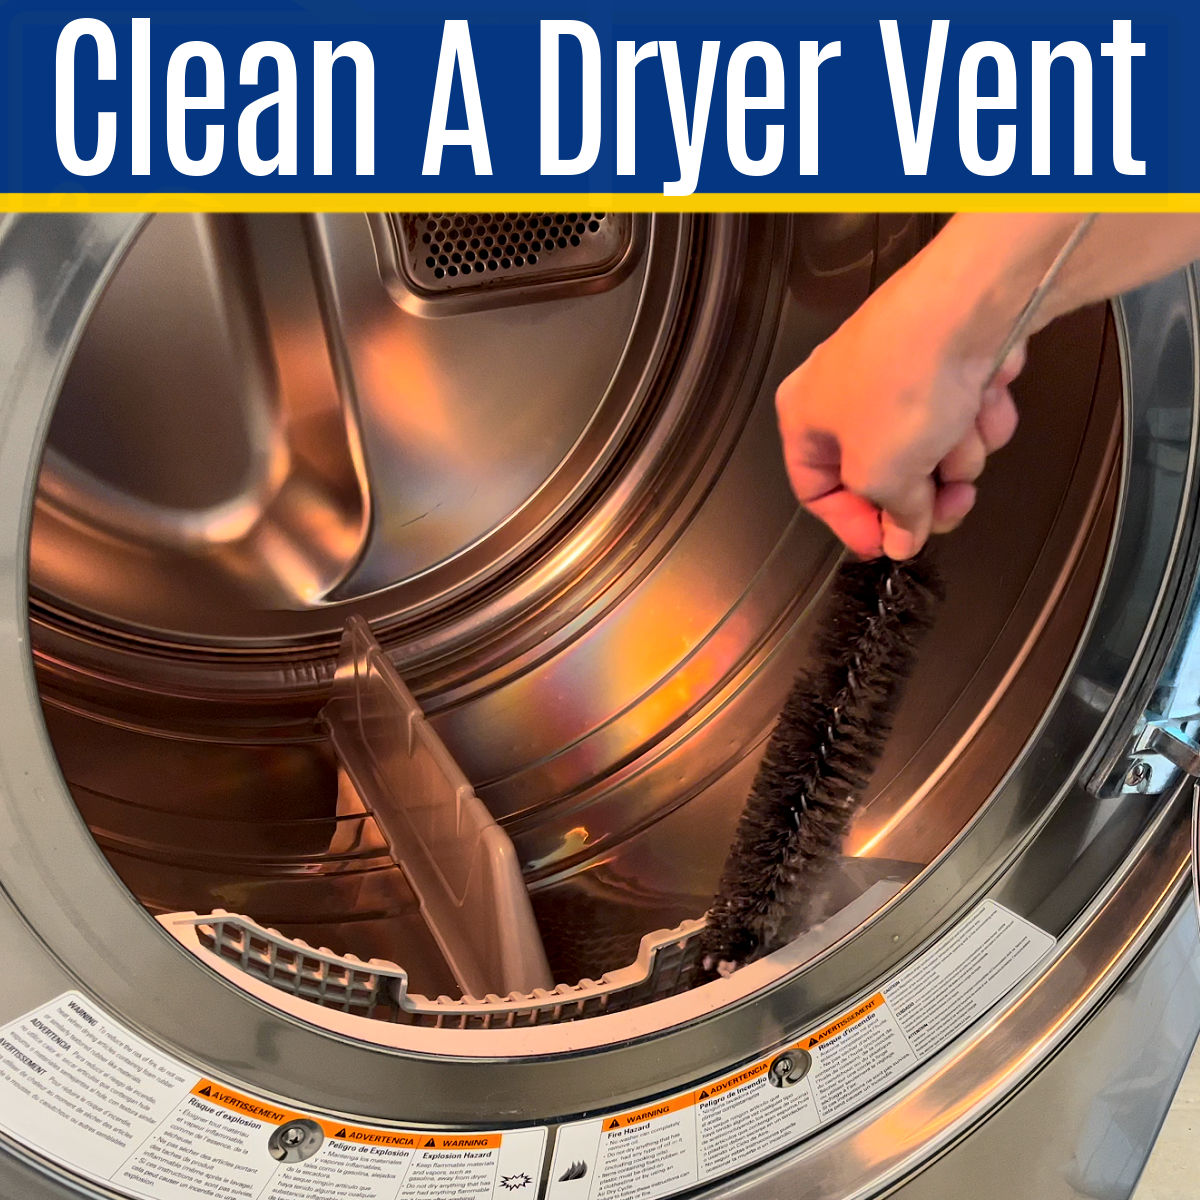 Dryer Vent Cleaner Kit Vacuum Attachment And Dryer Vent Brush. This Dryer  Lint Brush Vent Trap Cleaner Tool Can Reduce Your Risk Of A House Fire! The